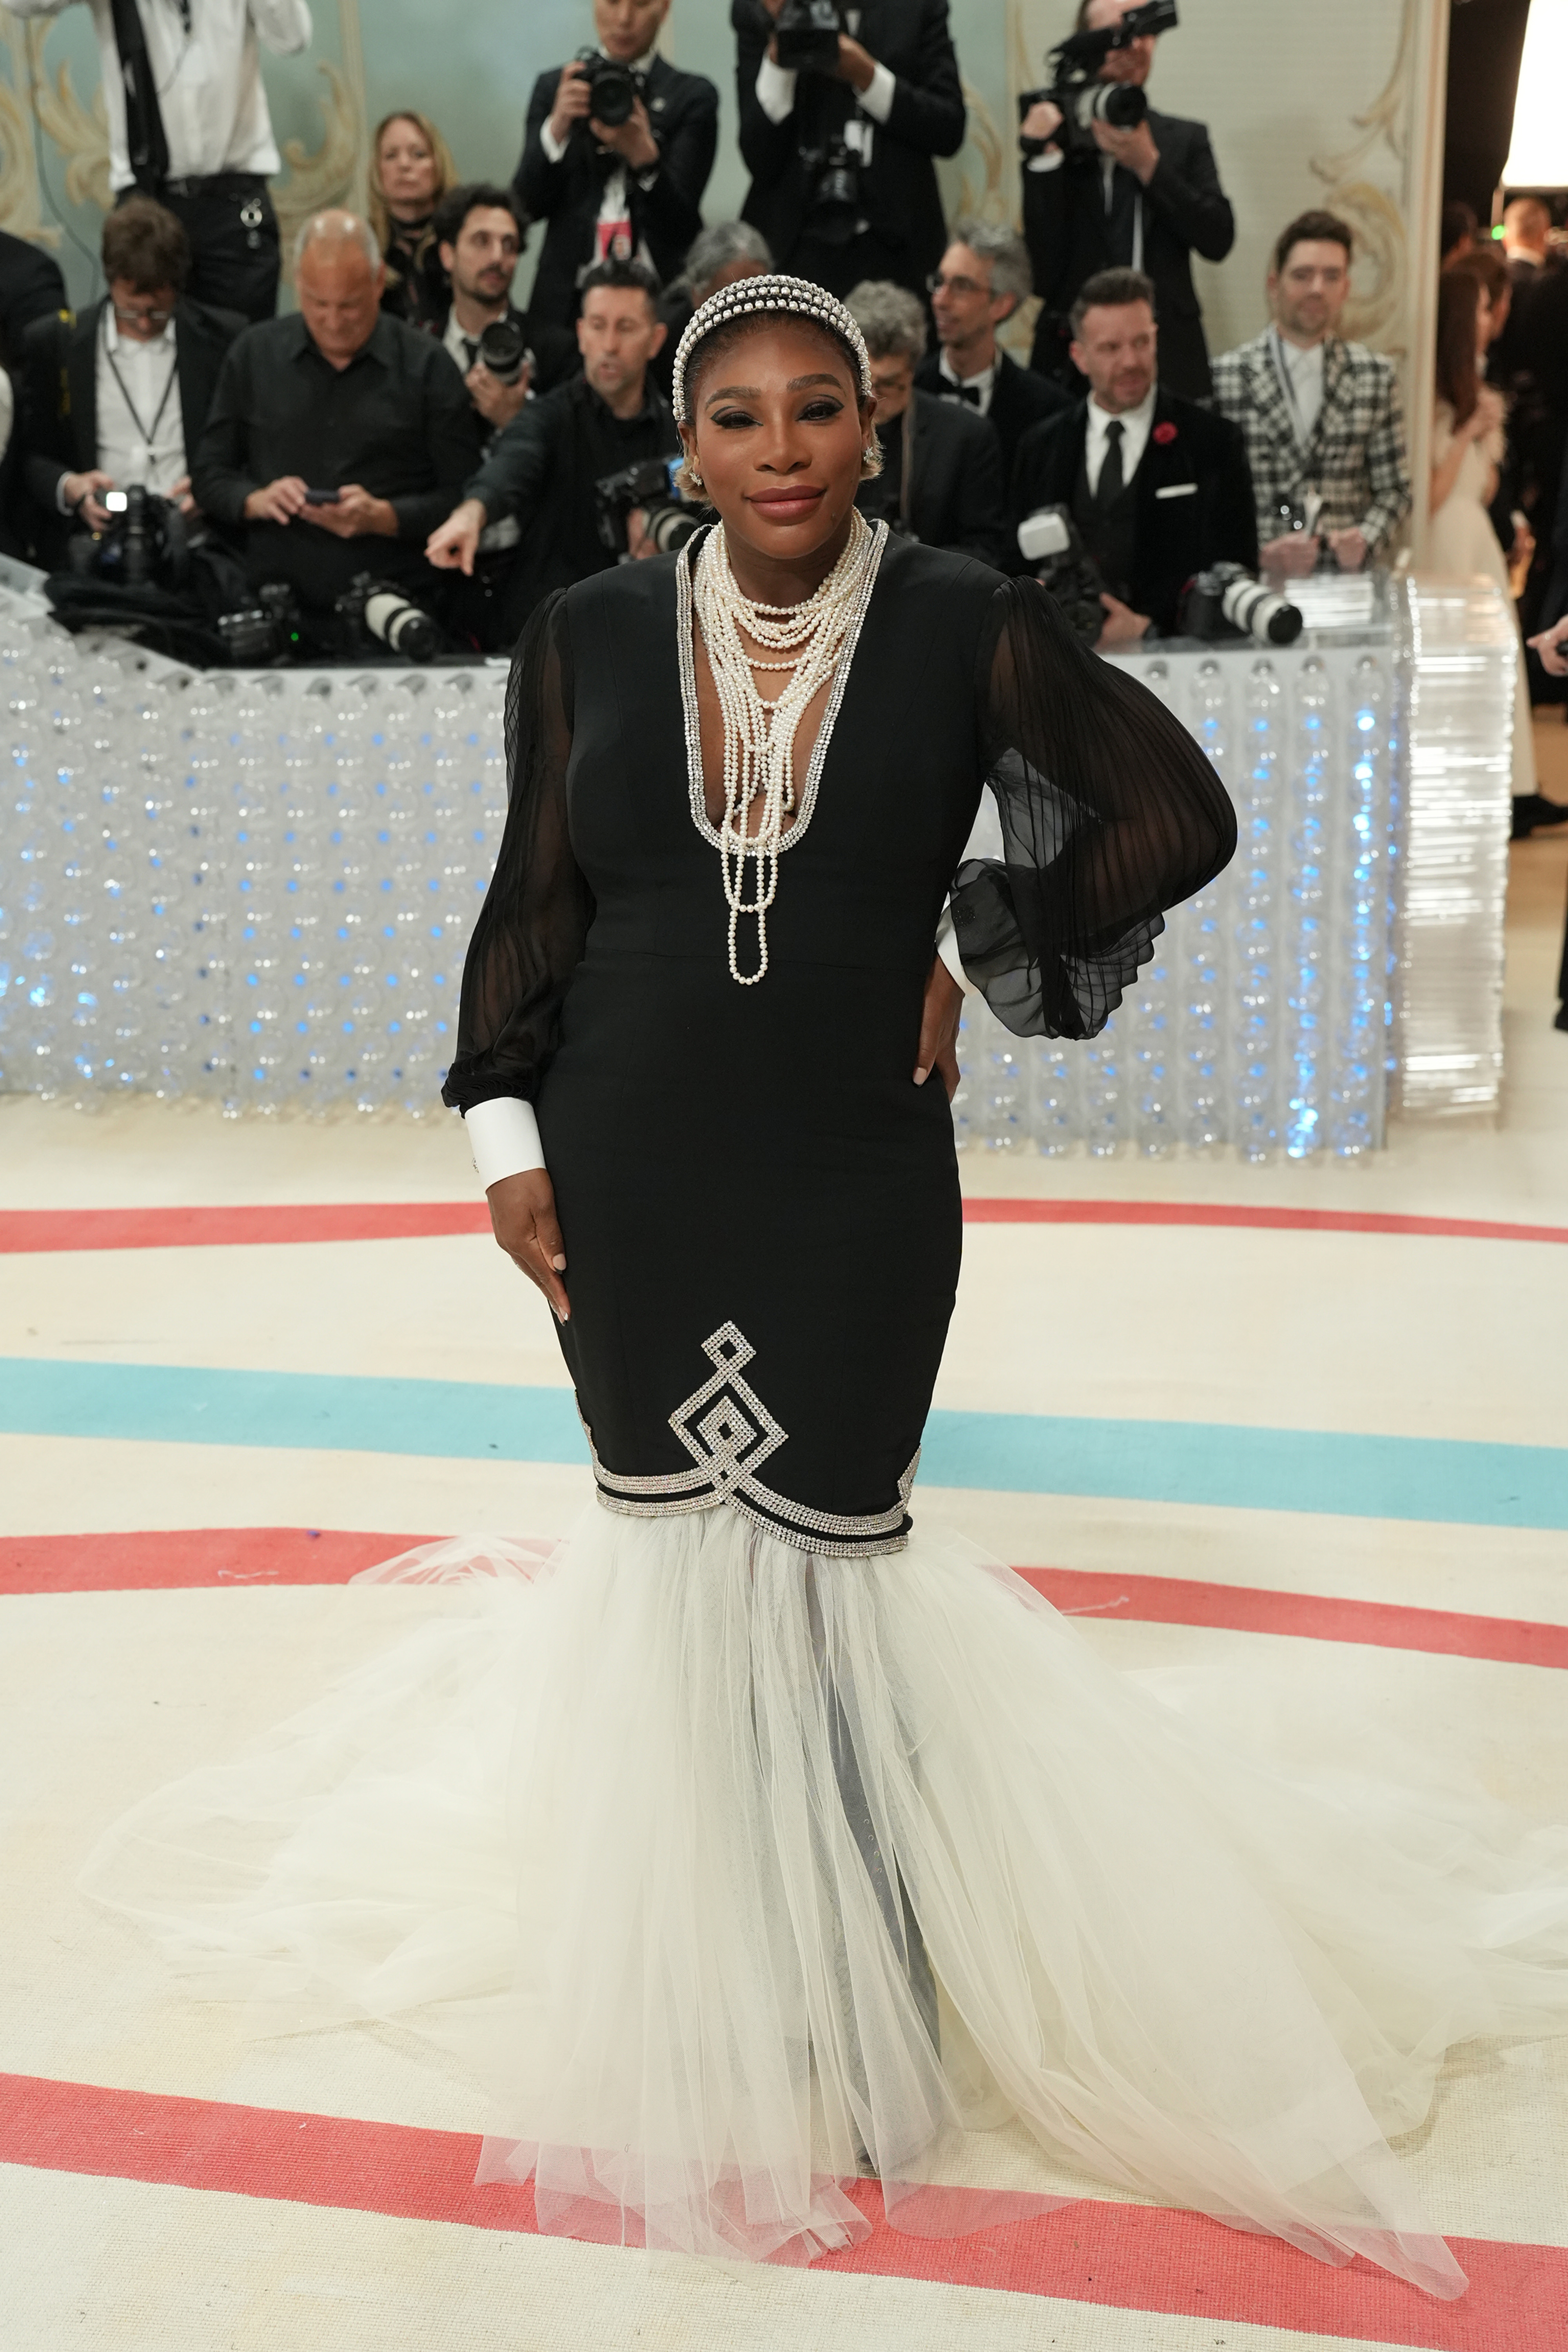 Serena Williams in a black dress with white accents and tulle at the bottom, wearing a silver necklace